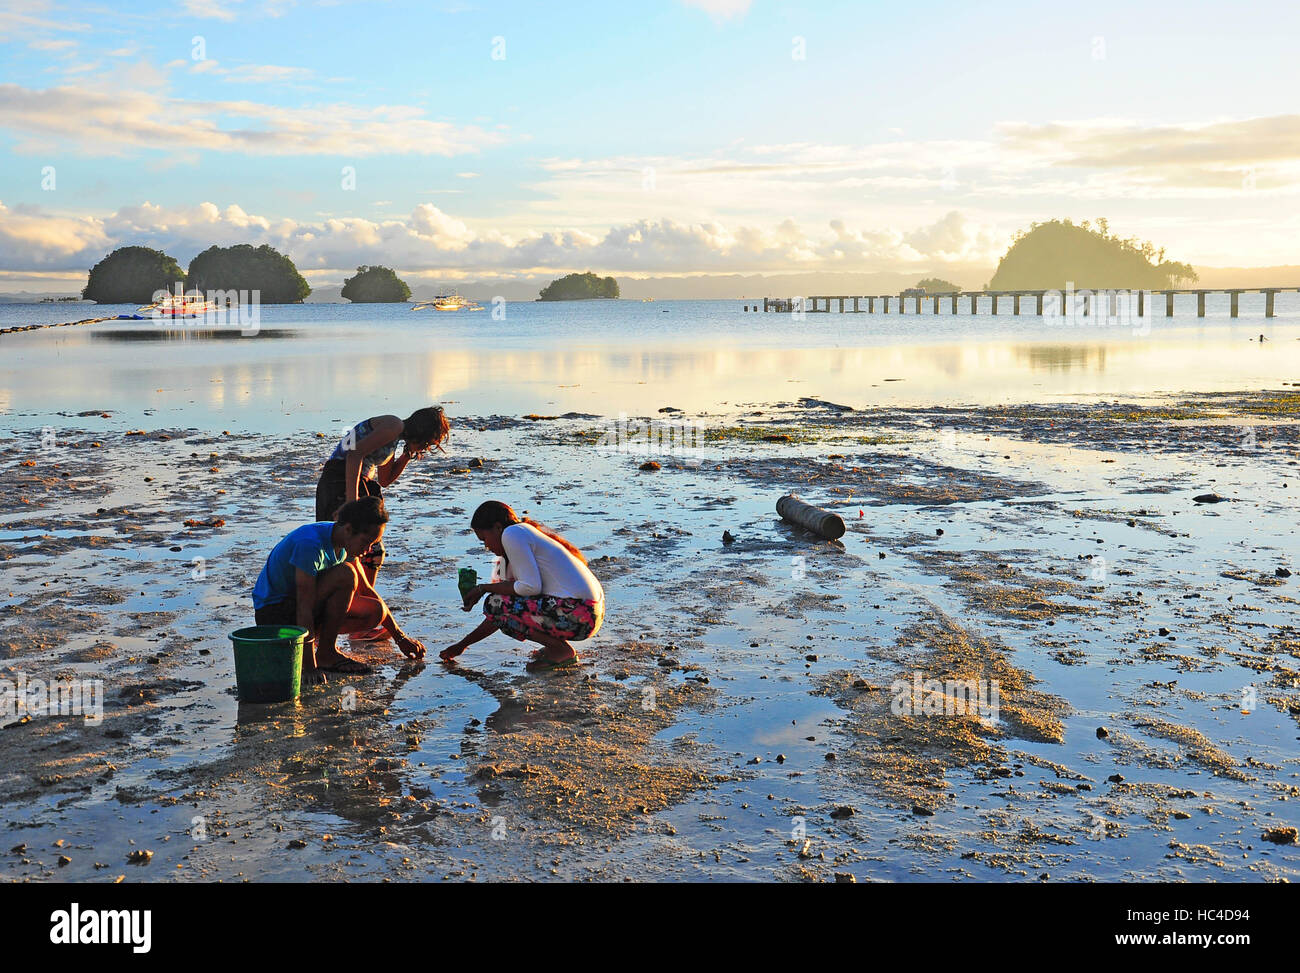 Locals gathering shells and crabs on the beach in Britania Group of Islands, Surigao del Sur, Philippines. Stock Photo